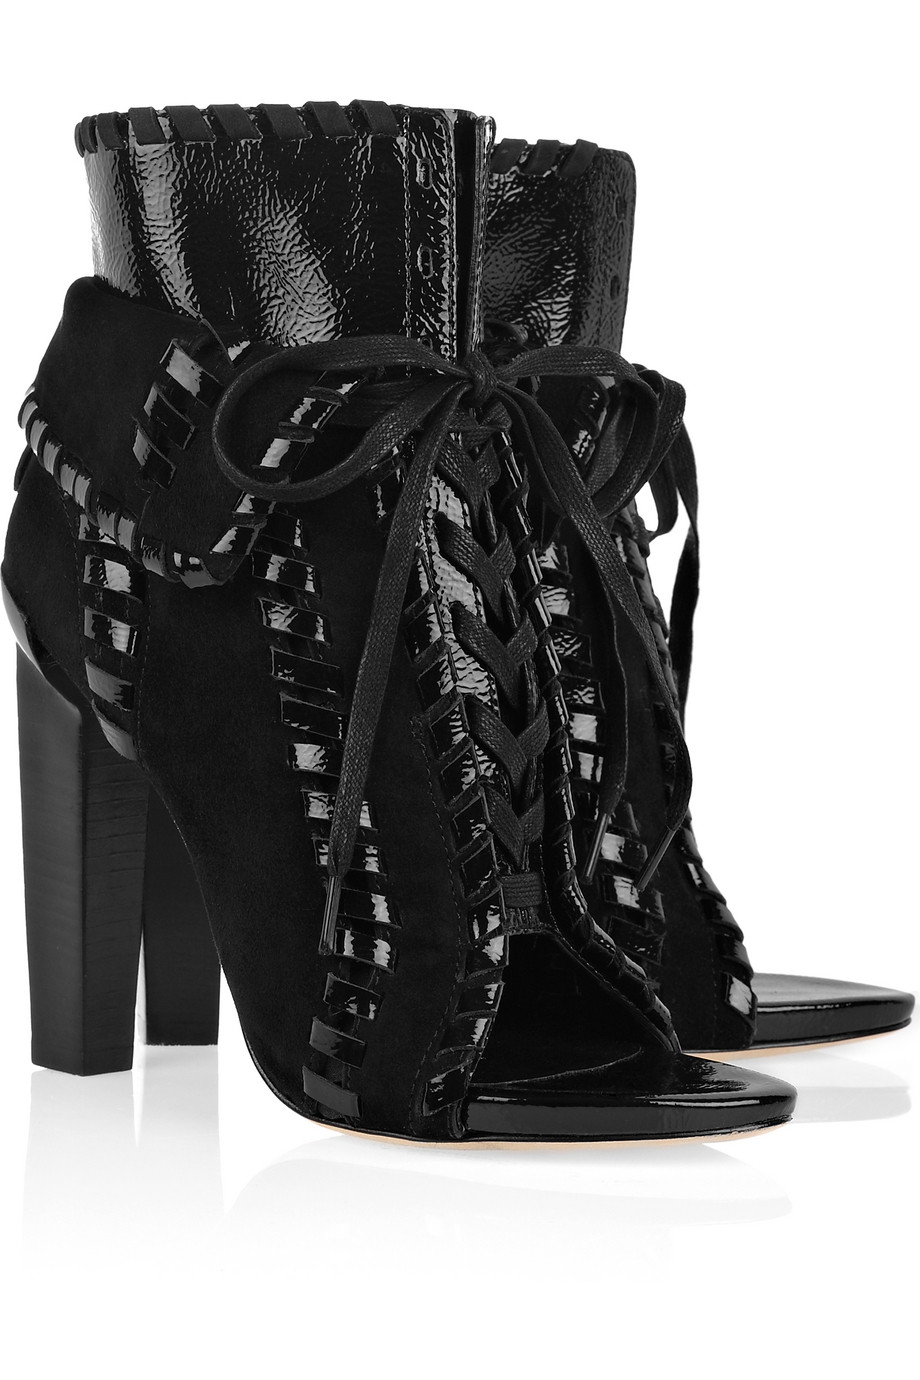 Alexander Wang Freja Suede and Patent-leather Boots in Black - Lyst